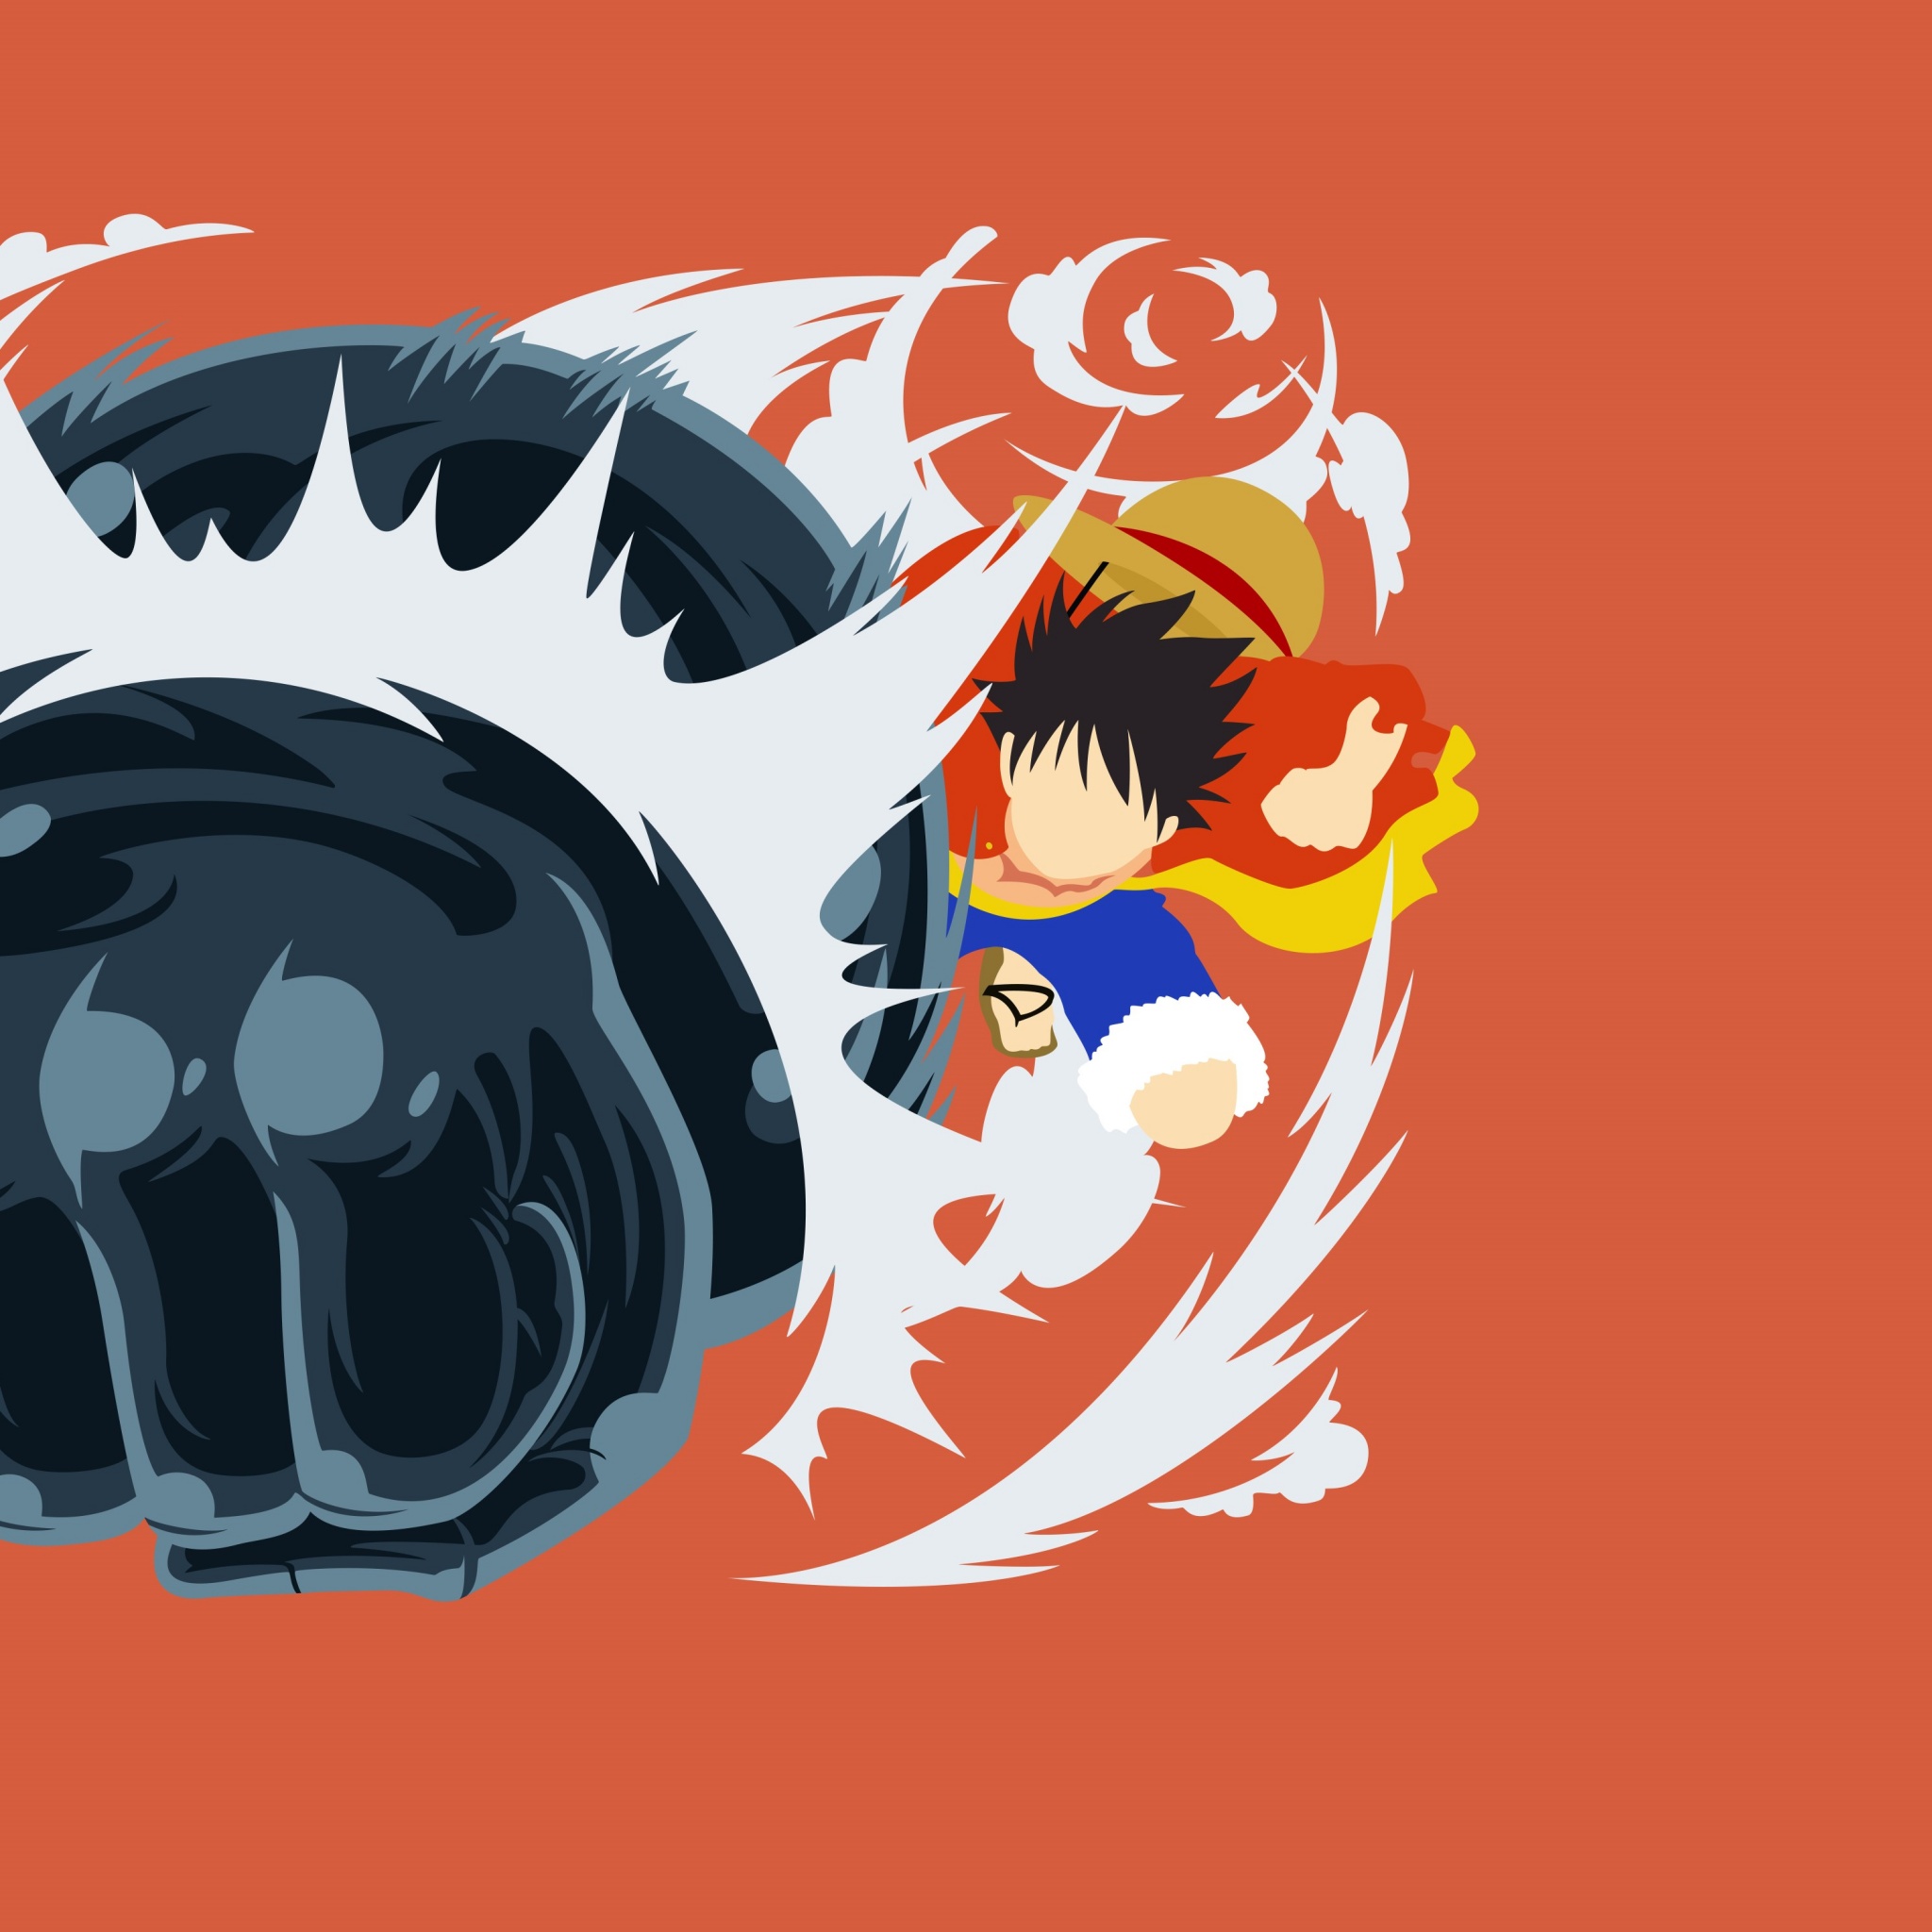 81 One Piece wallpapers ① Download free beautiful full HD backgrounds for  desktop computers and smartphones  One piece crew One piece episodes One  piece manga